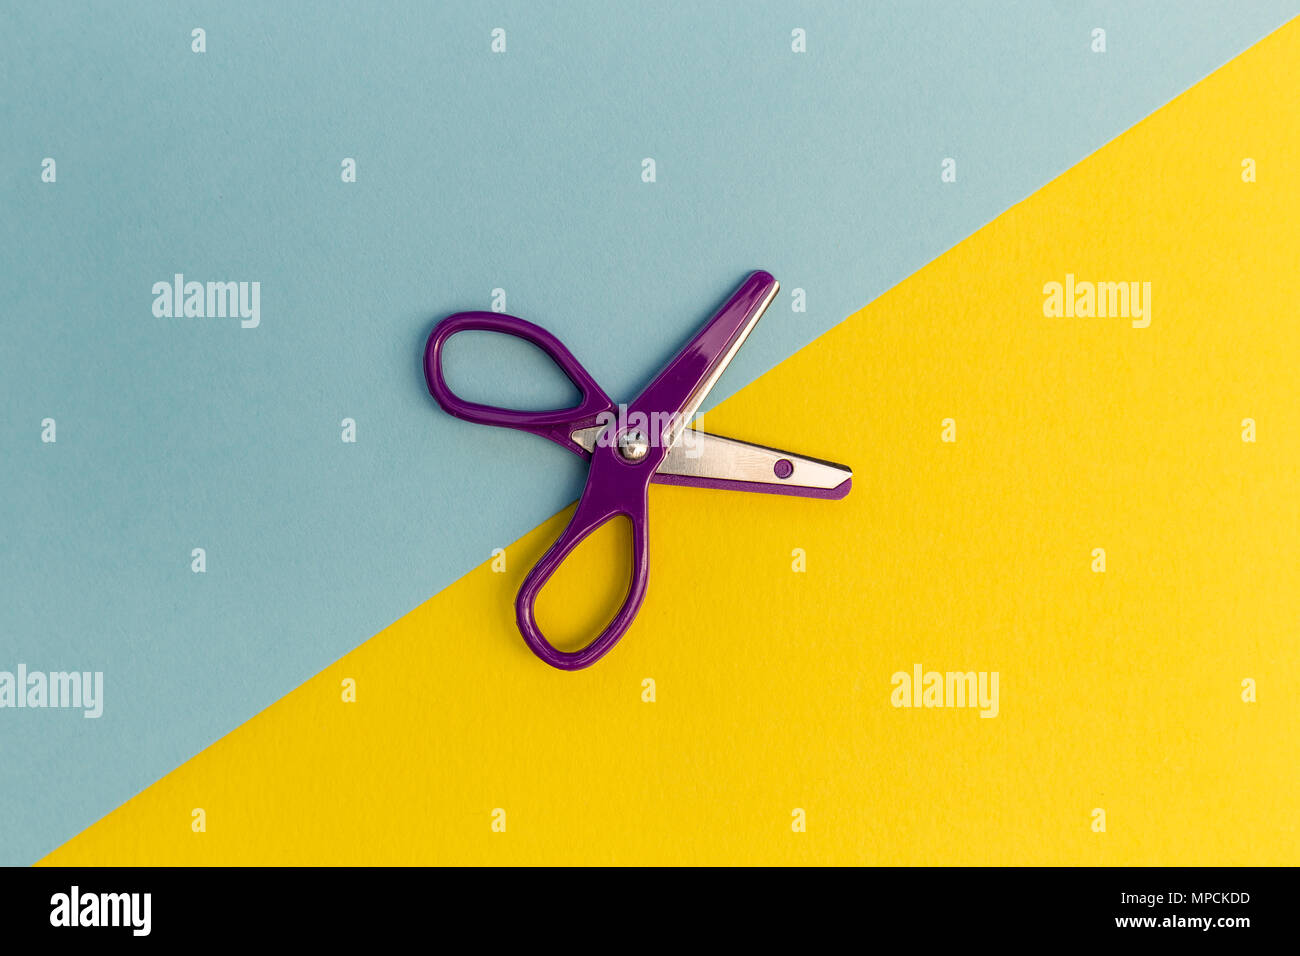 Scissors cutting paper line stationery concept Stock Photo